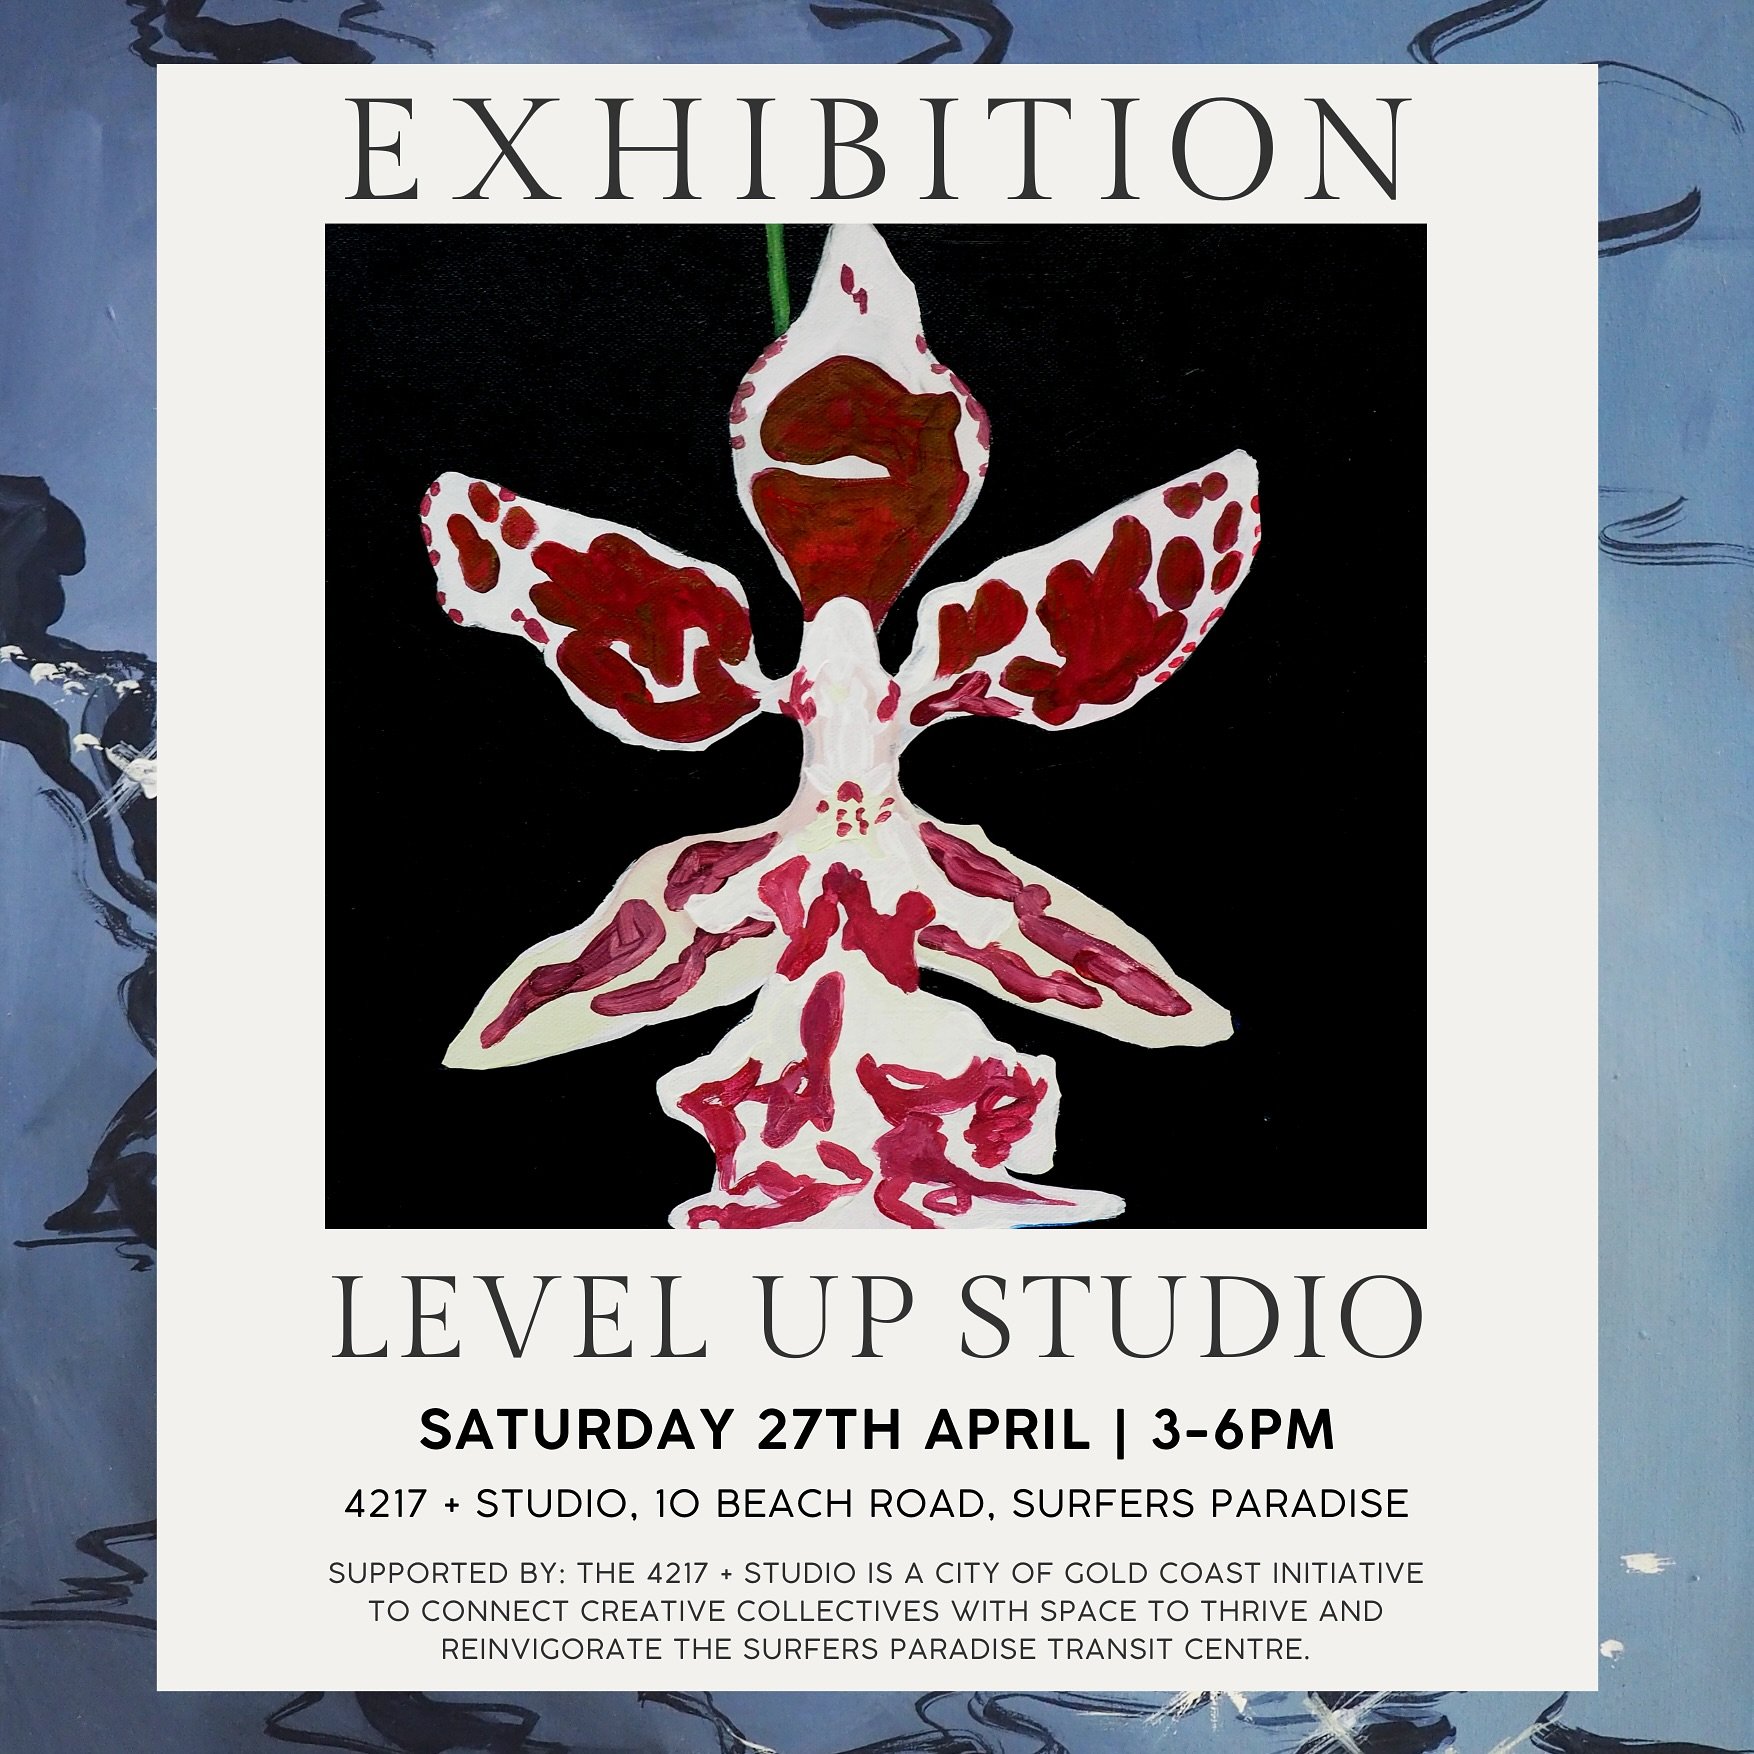 One last hurrah in our shared studio! 💫

We&rsquo;re wrapping up our time at Level Up with one last open studio/exhibition so you can see what we&rsquo;ve been working on. Mark it in your diaries! Hope you can make it &hearts;️ 🥂

Supported by: The